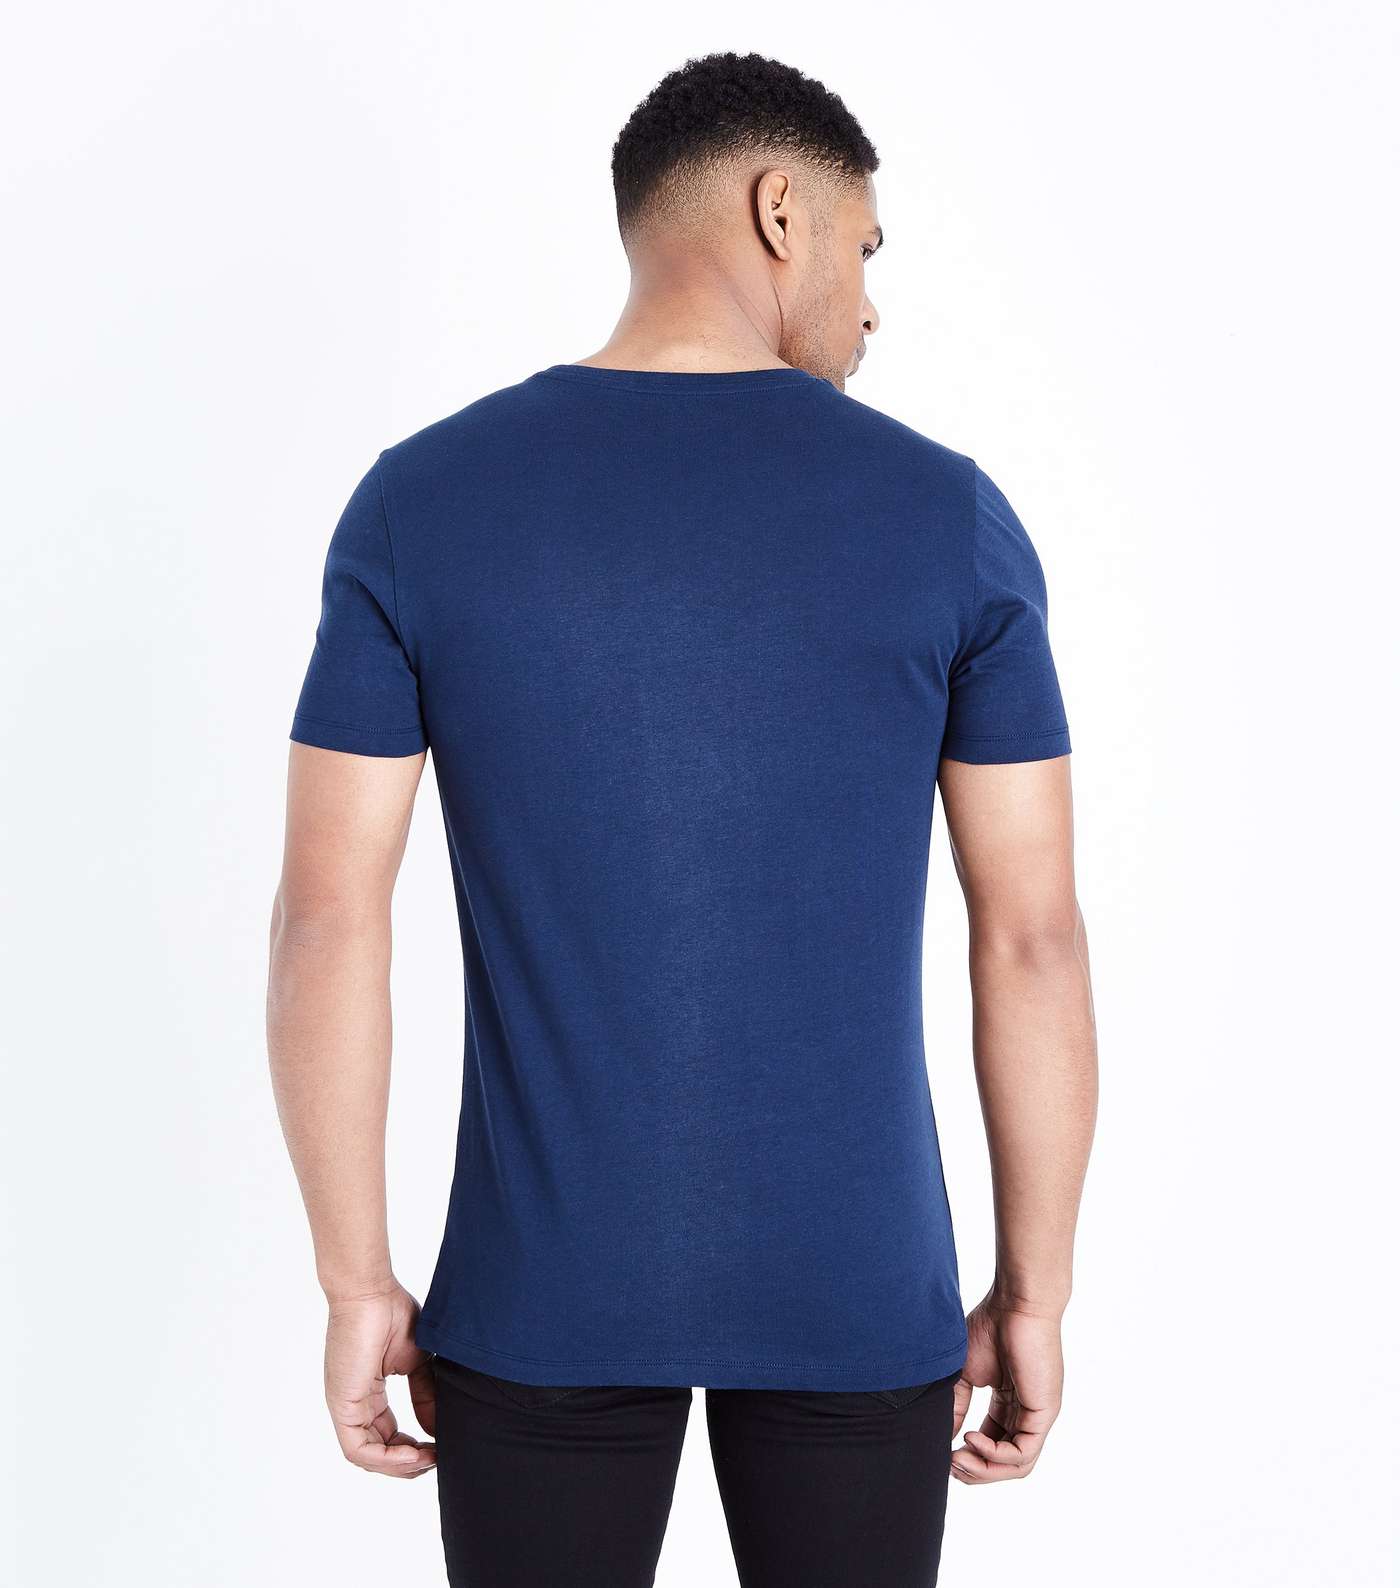 Navy Short Sleeve Muscle Fit T-Shirt Image 3